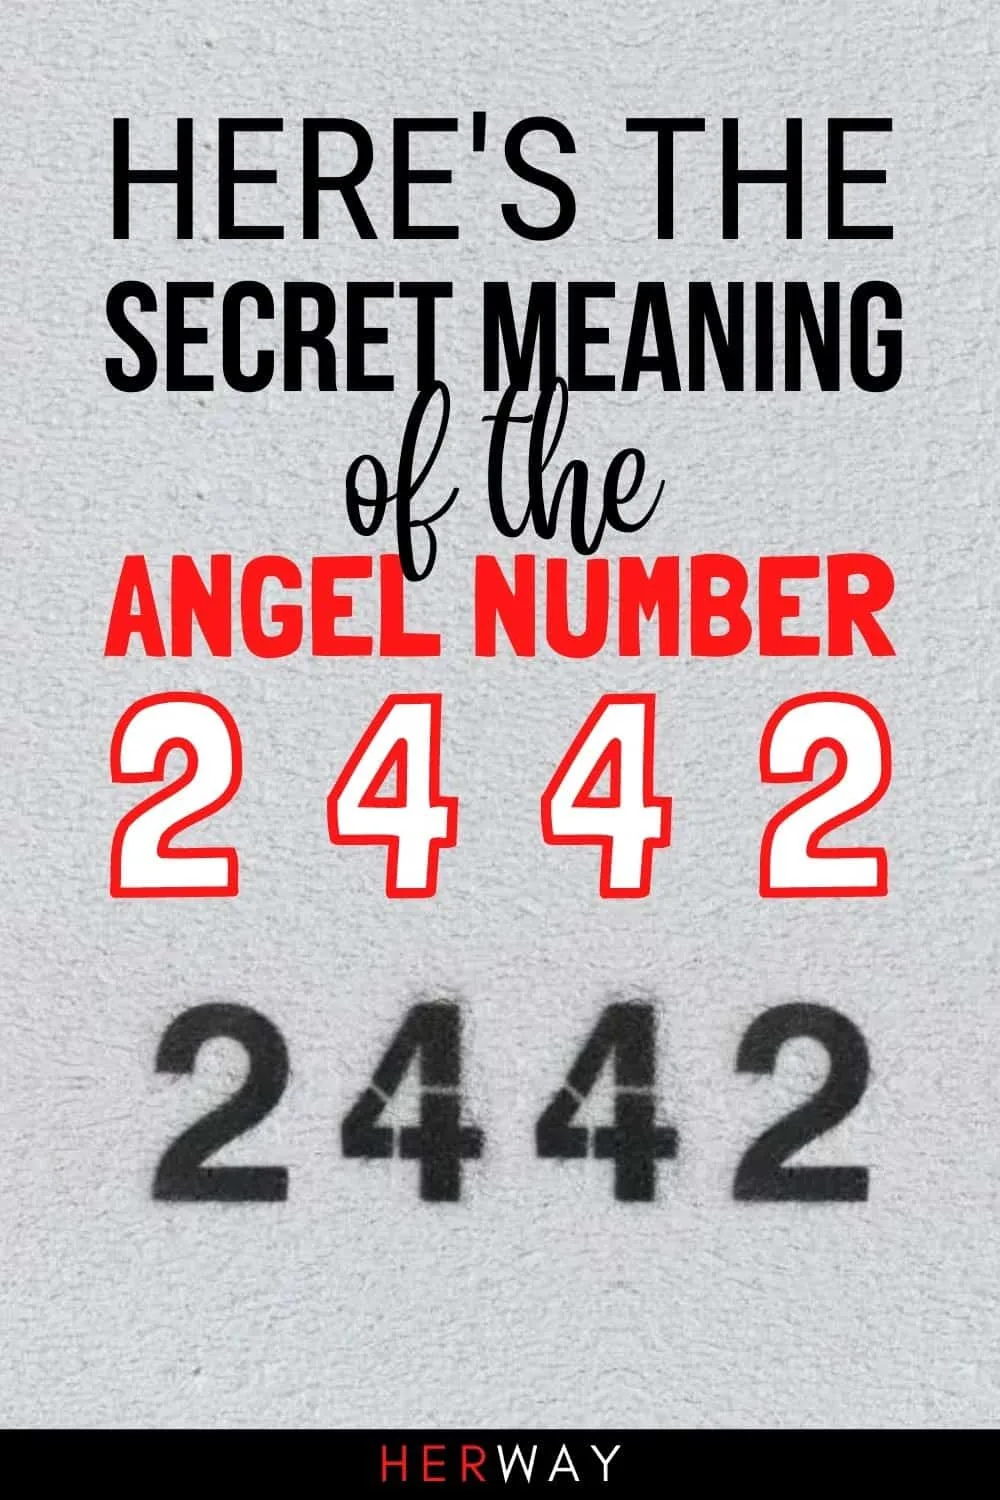 2442 Angel Number And 10 Reasons Why You Keep Seeing It Pinterest